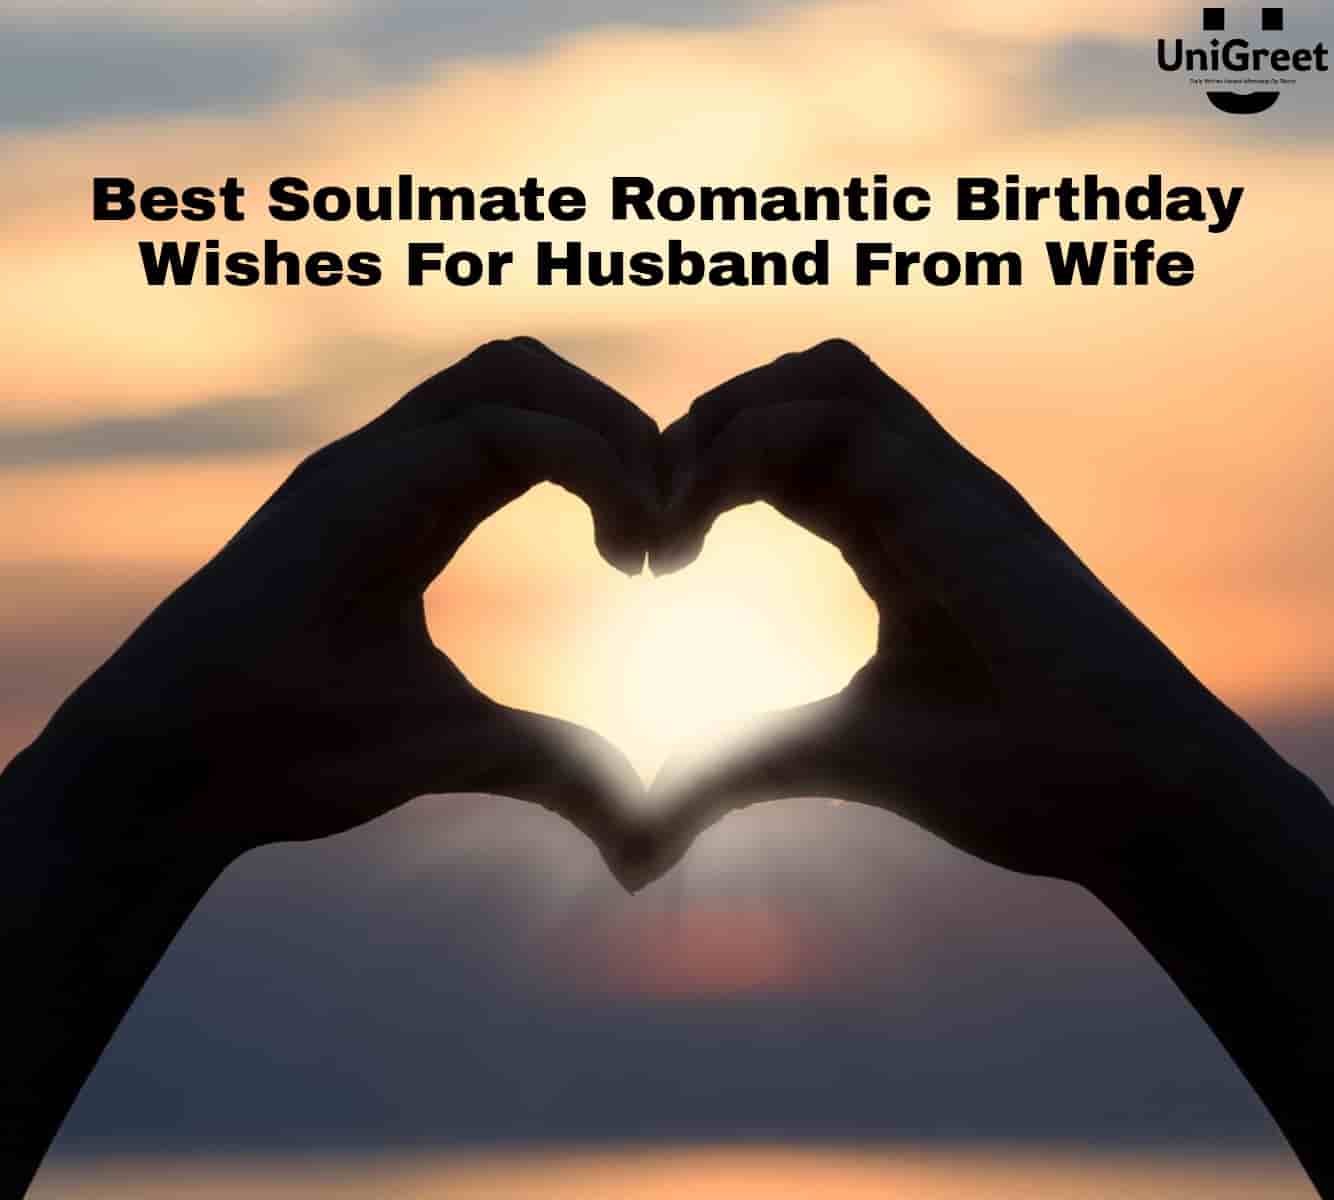 31 Best Soulmate Romantic Birthday Wishes For Husband From Wife